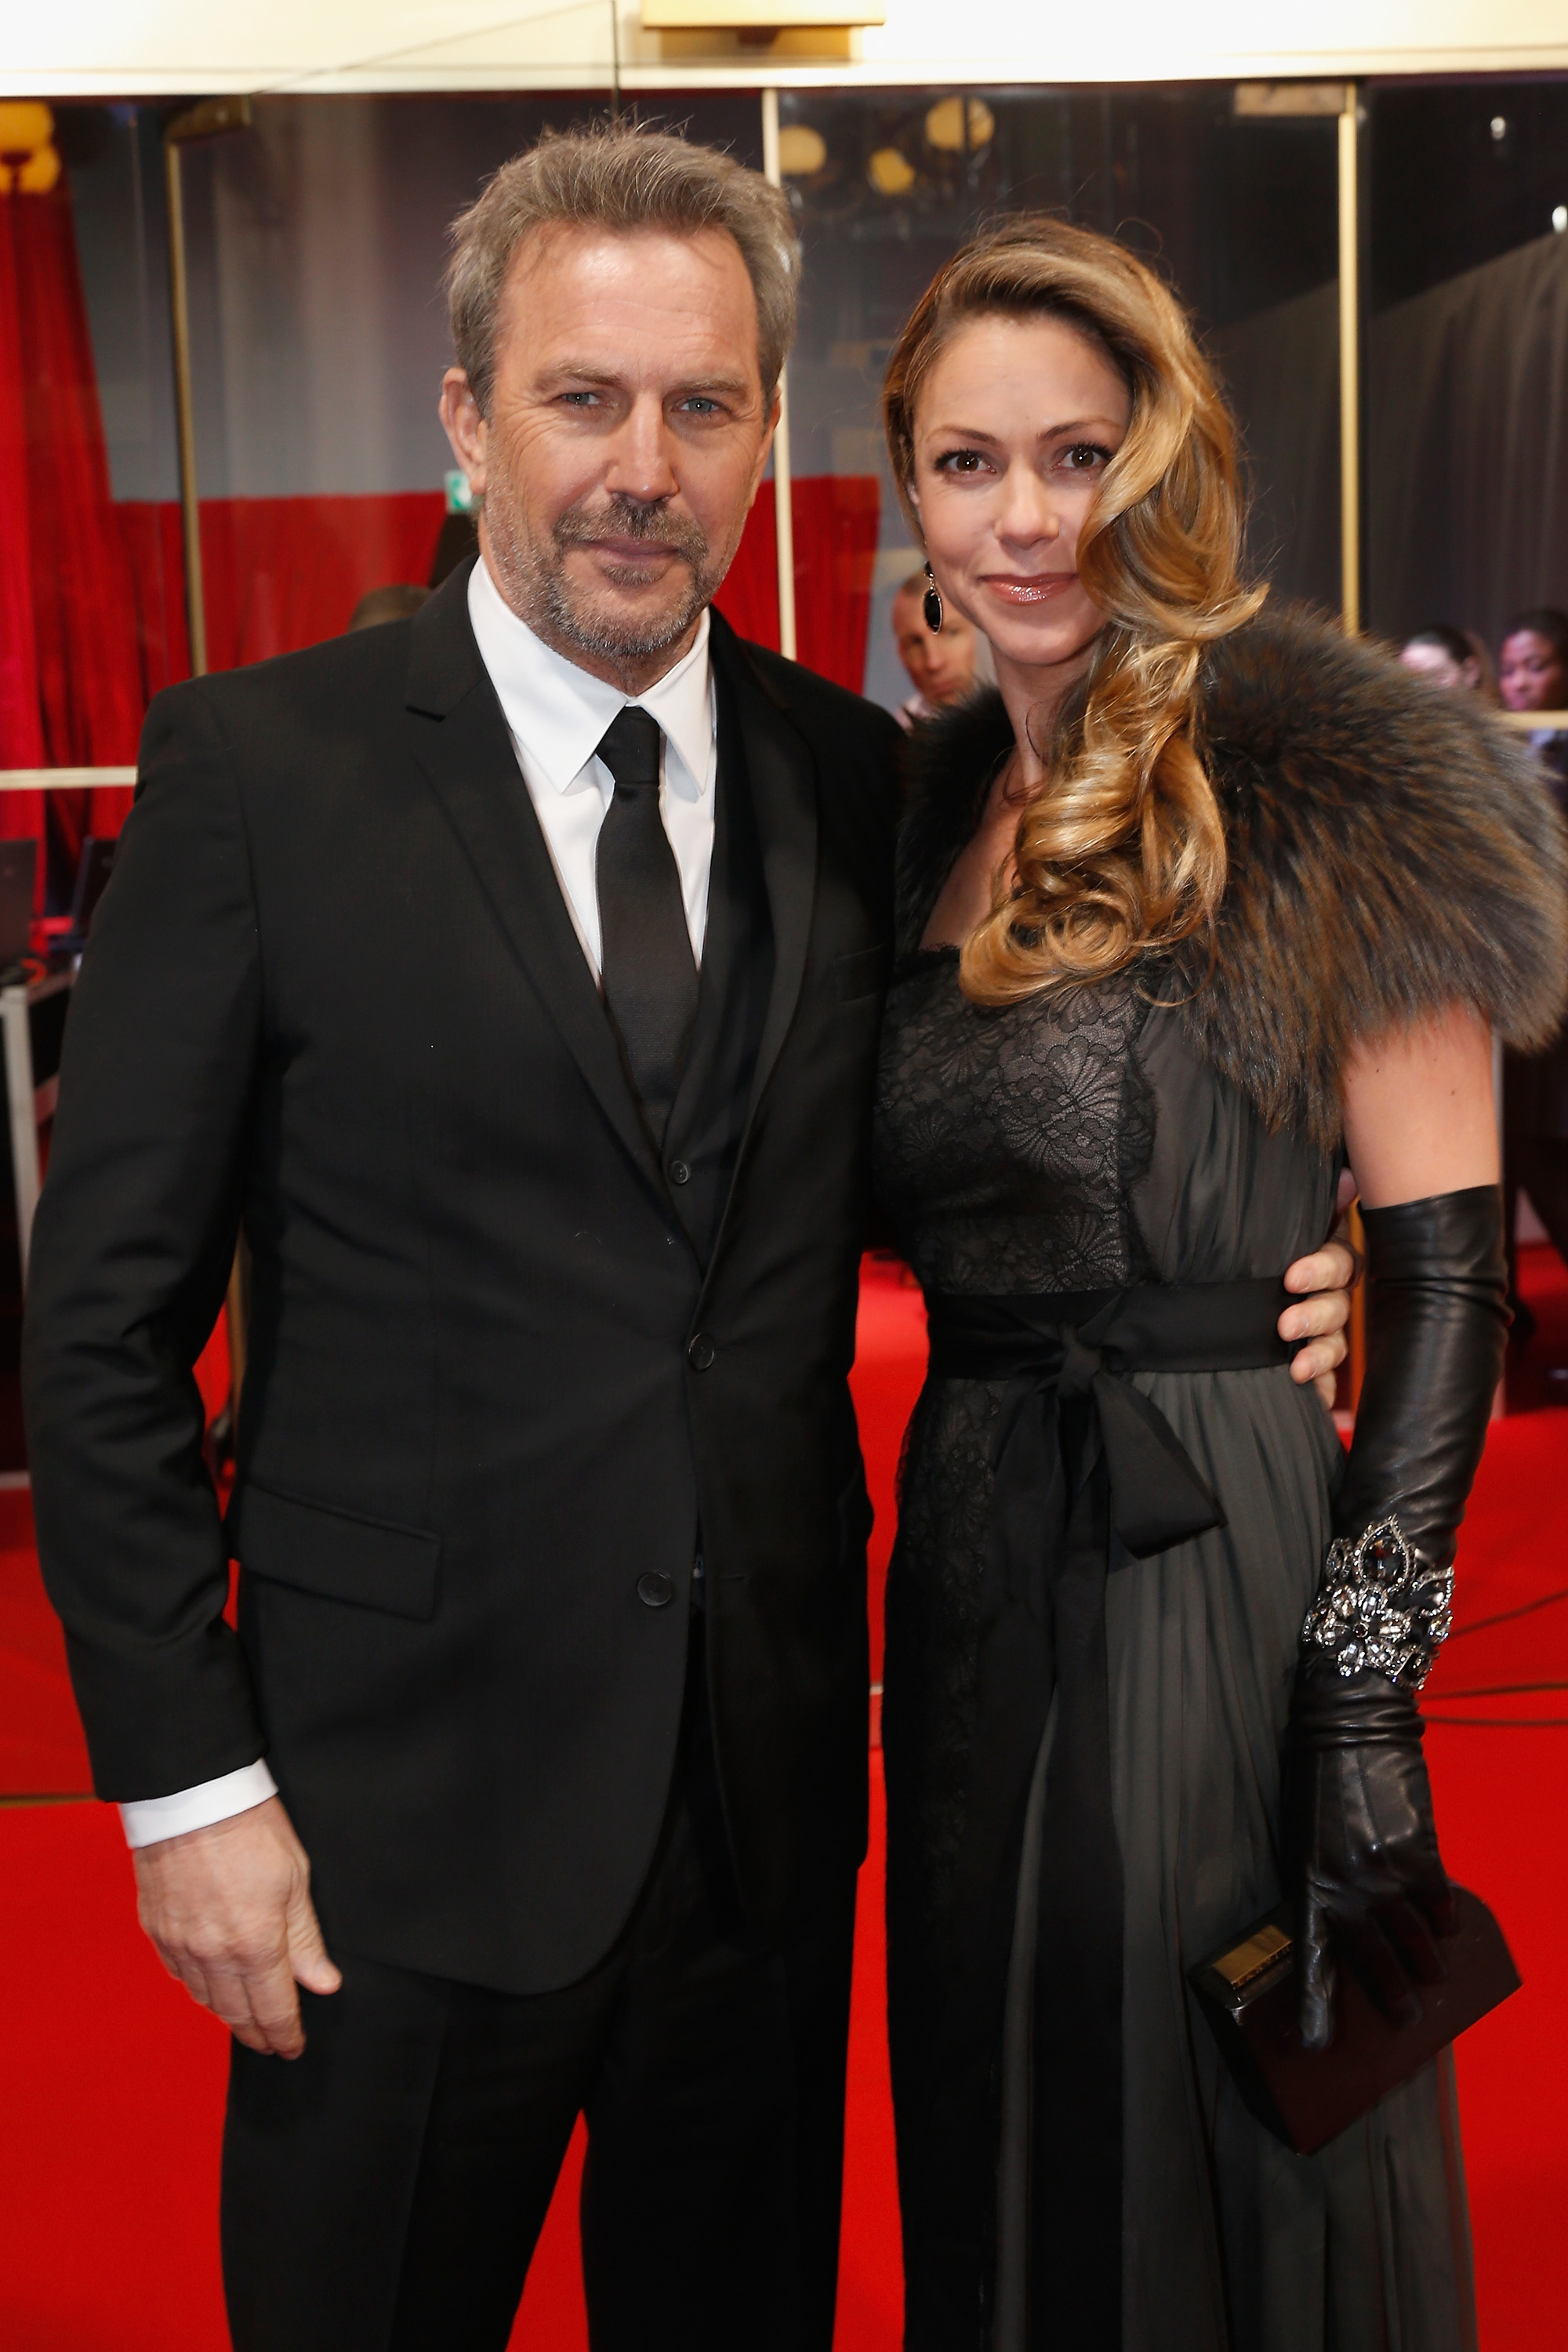 Kevin Costner and his wife Christine at the Cesar Film Awards on February 22, 2013, in Paris, France | Source: Getty Images